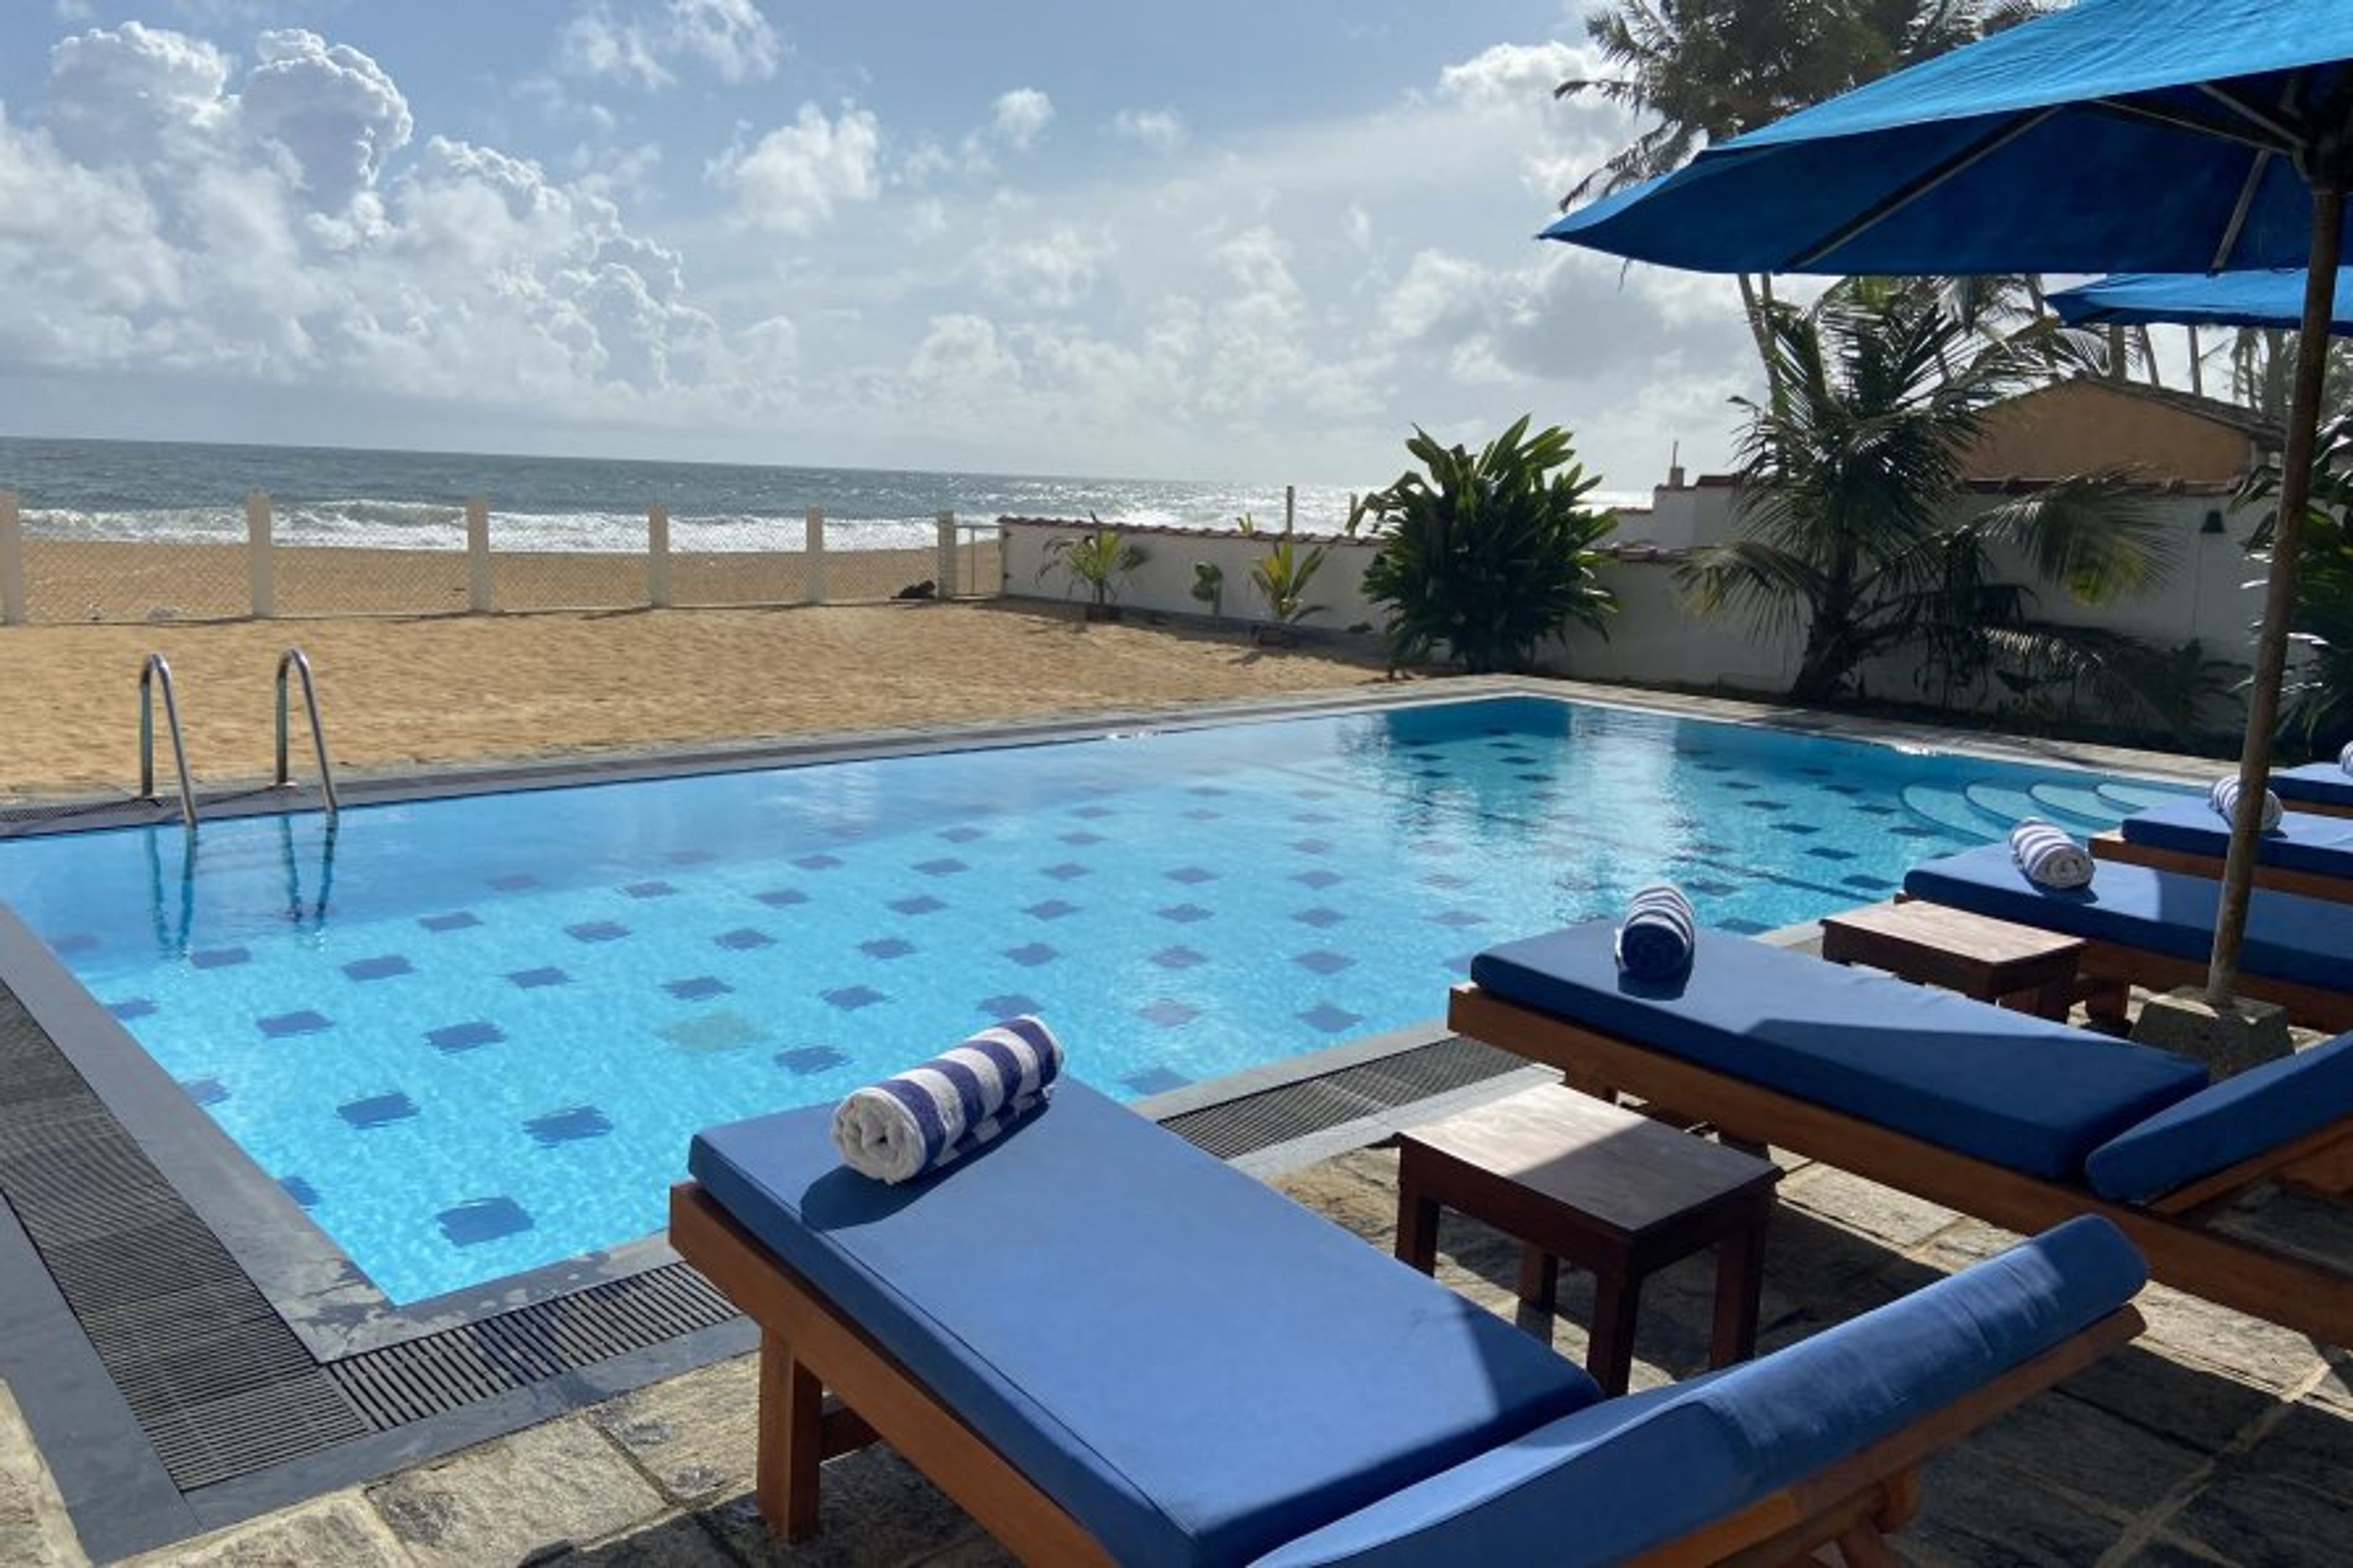 Beautifully expansive views of the beach and Indian Ocean.